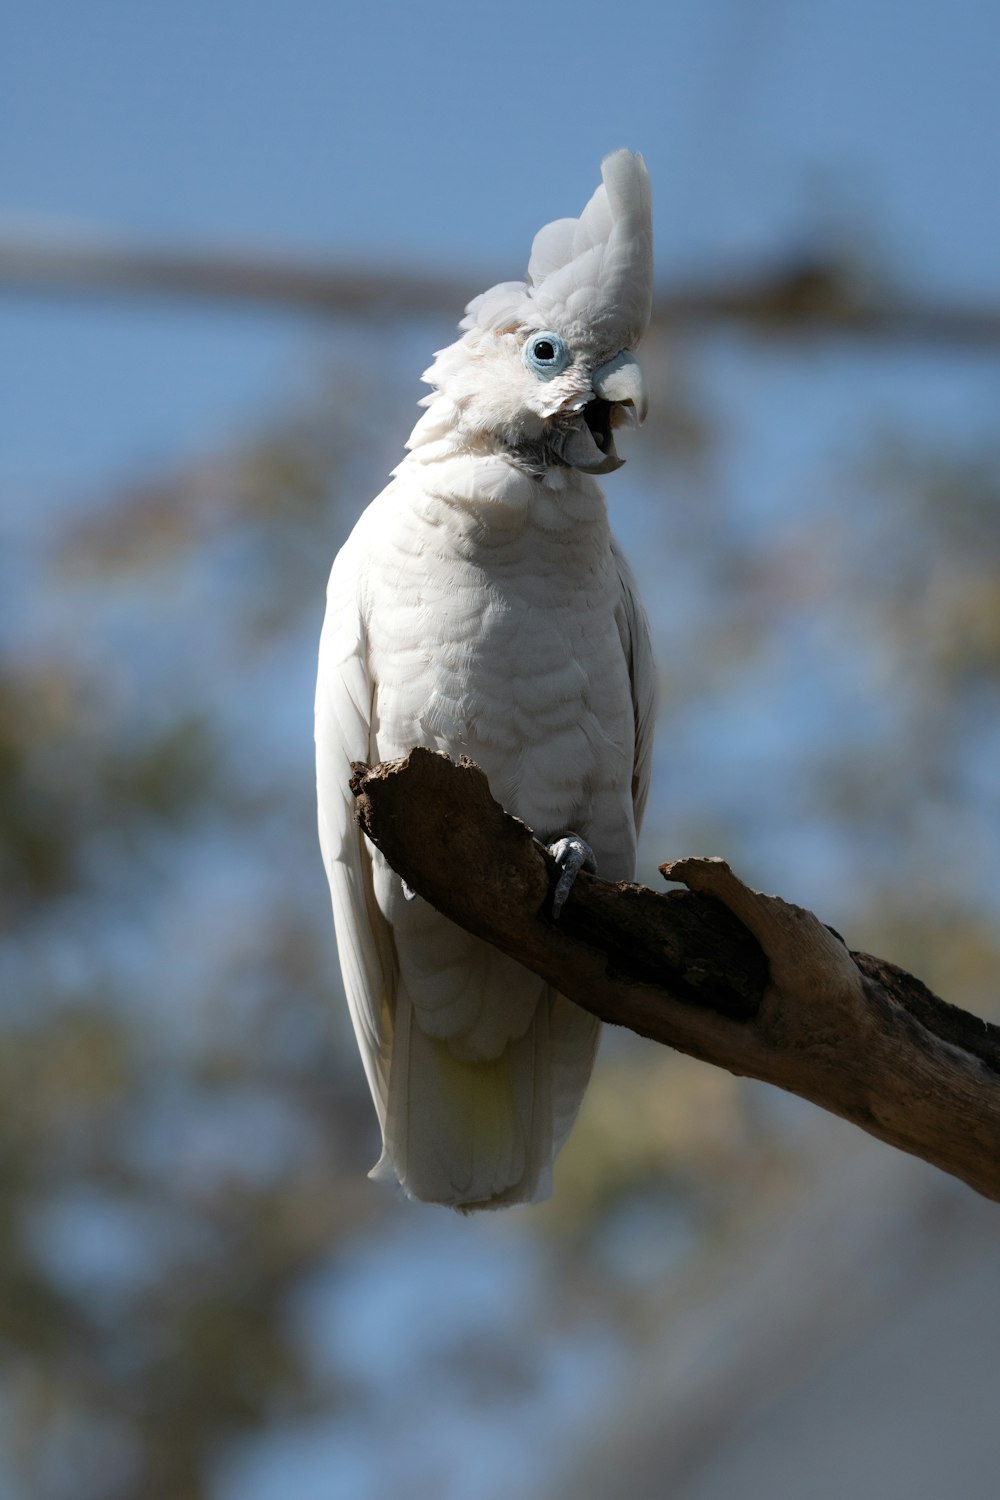 a white bird with blue eyes sitting on a branch